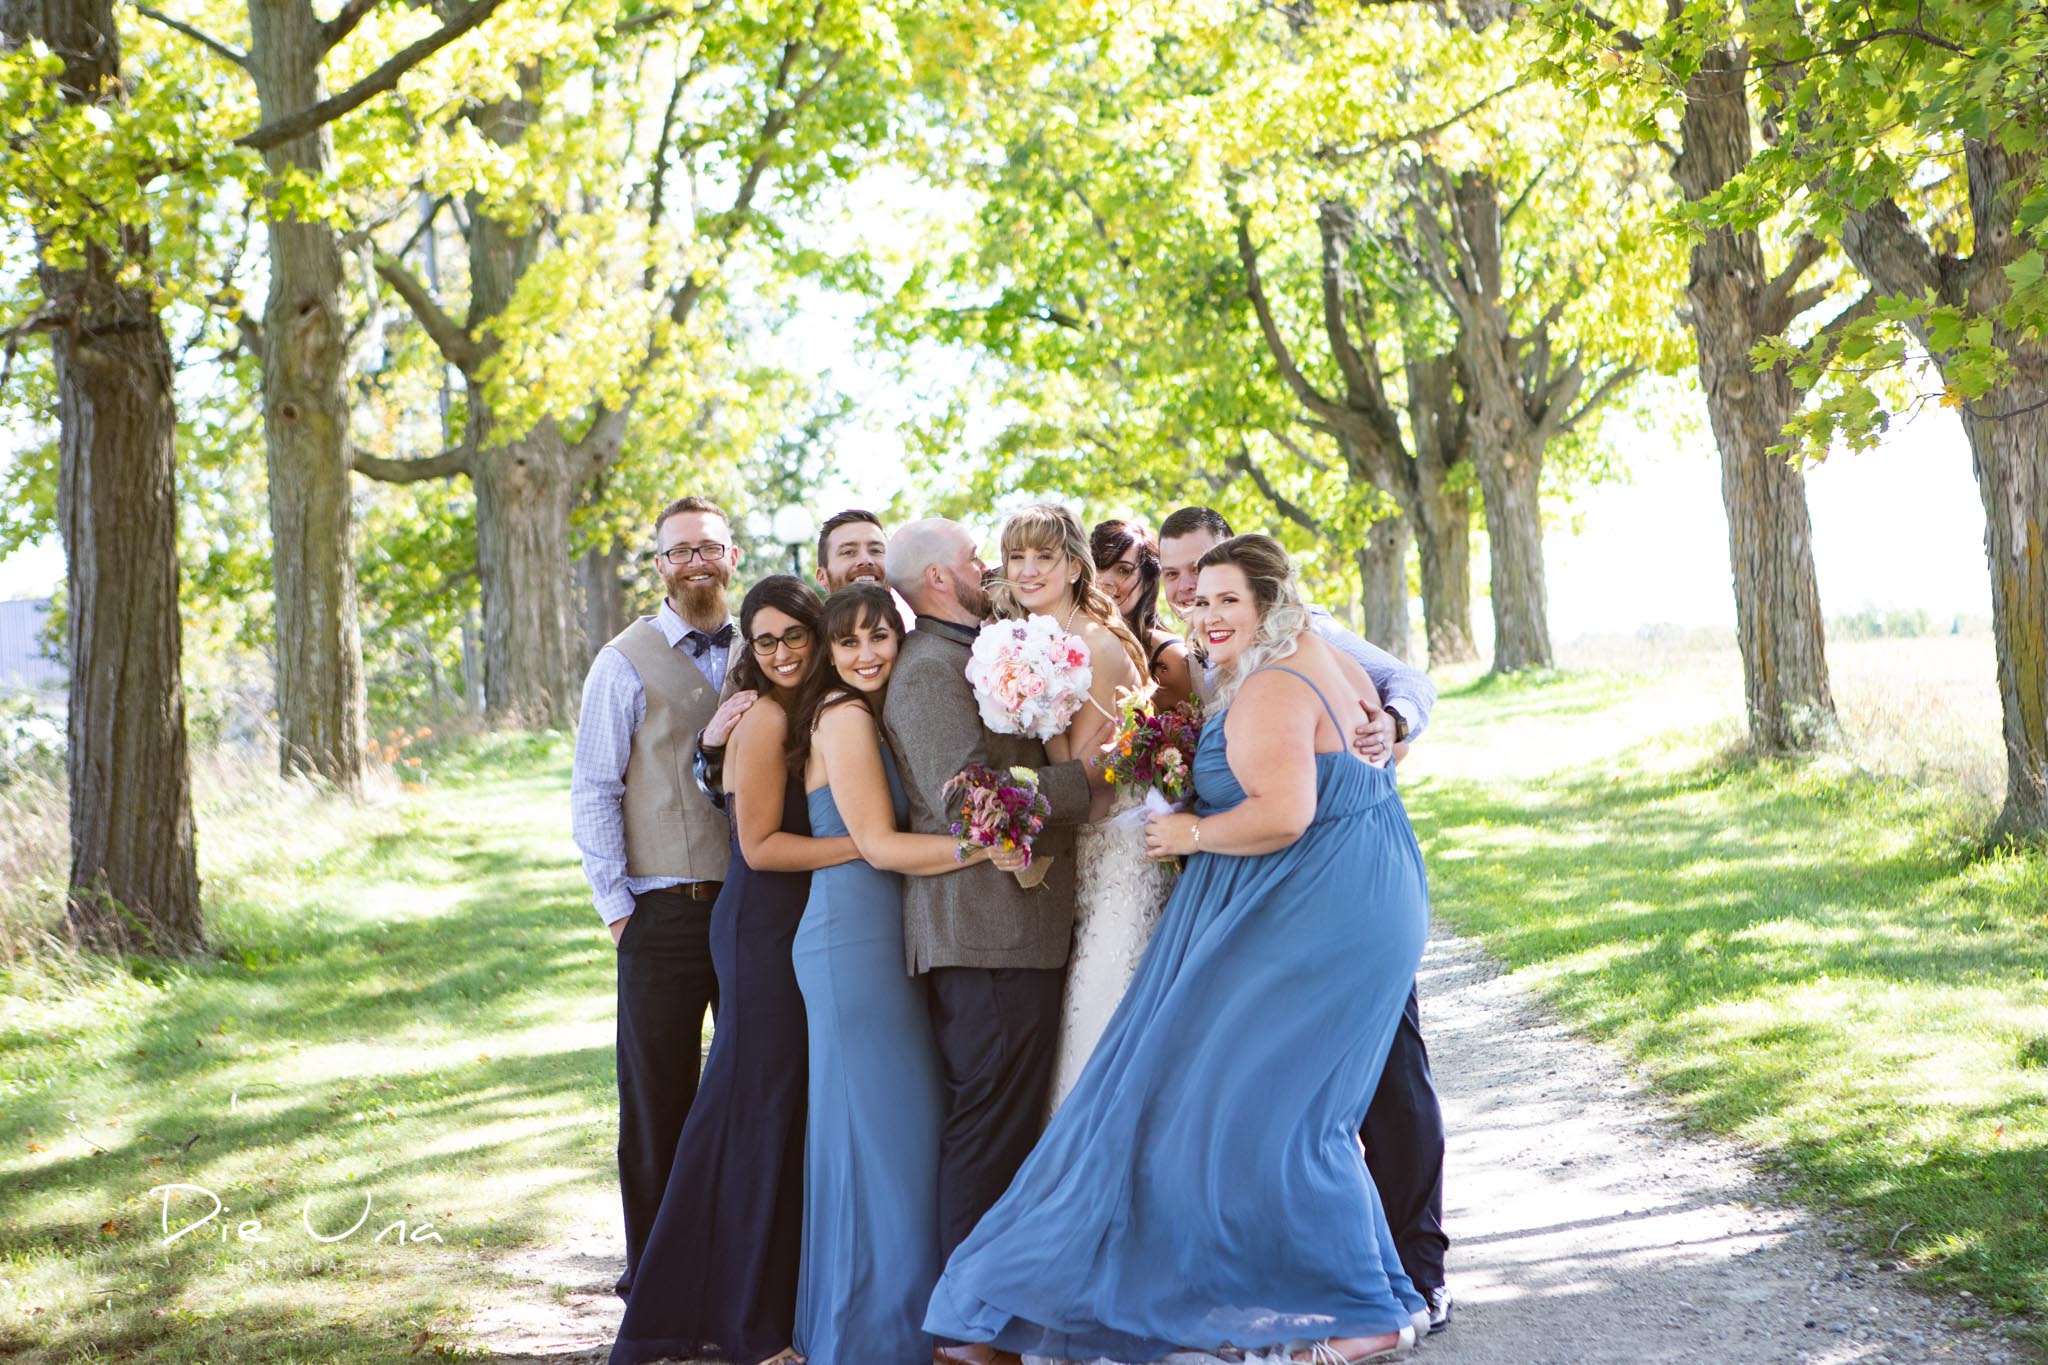 wedding party giving bride and groom a group hug on tree lined driveway.jpg